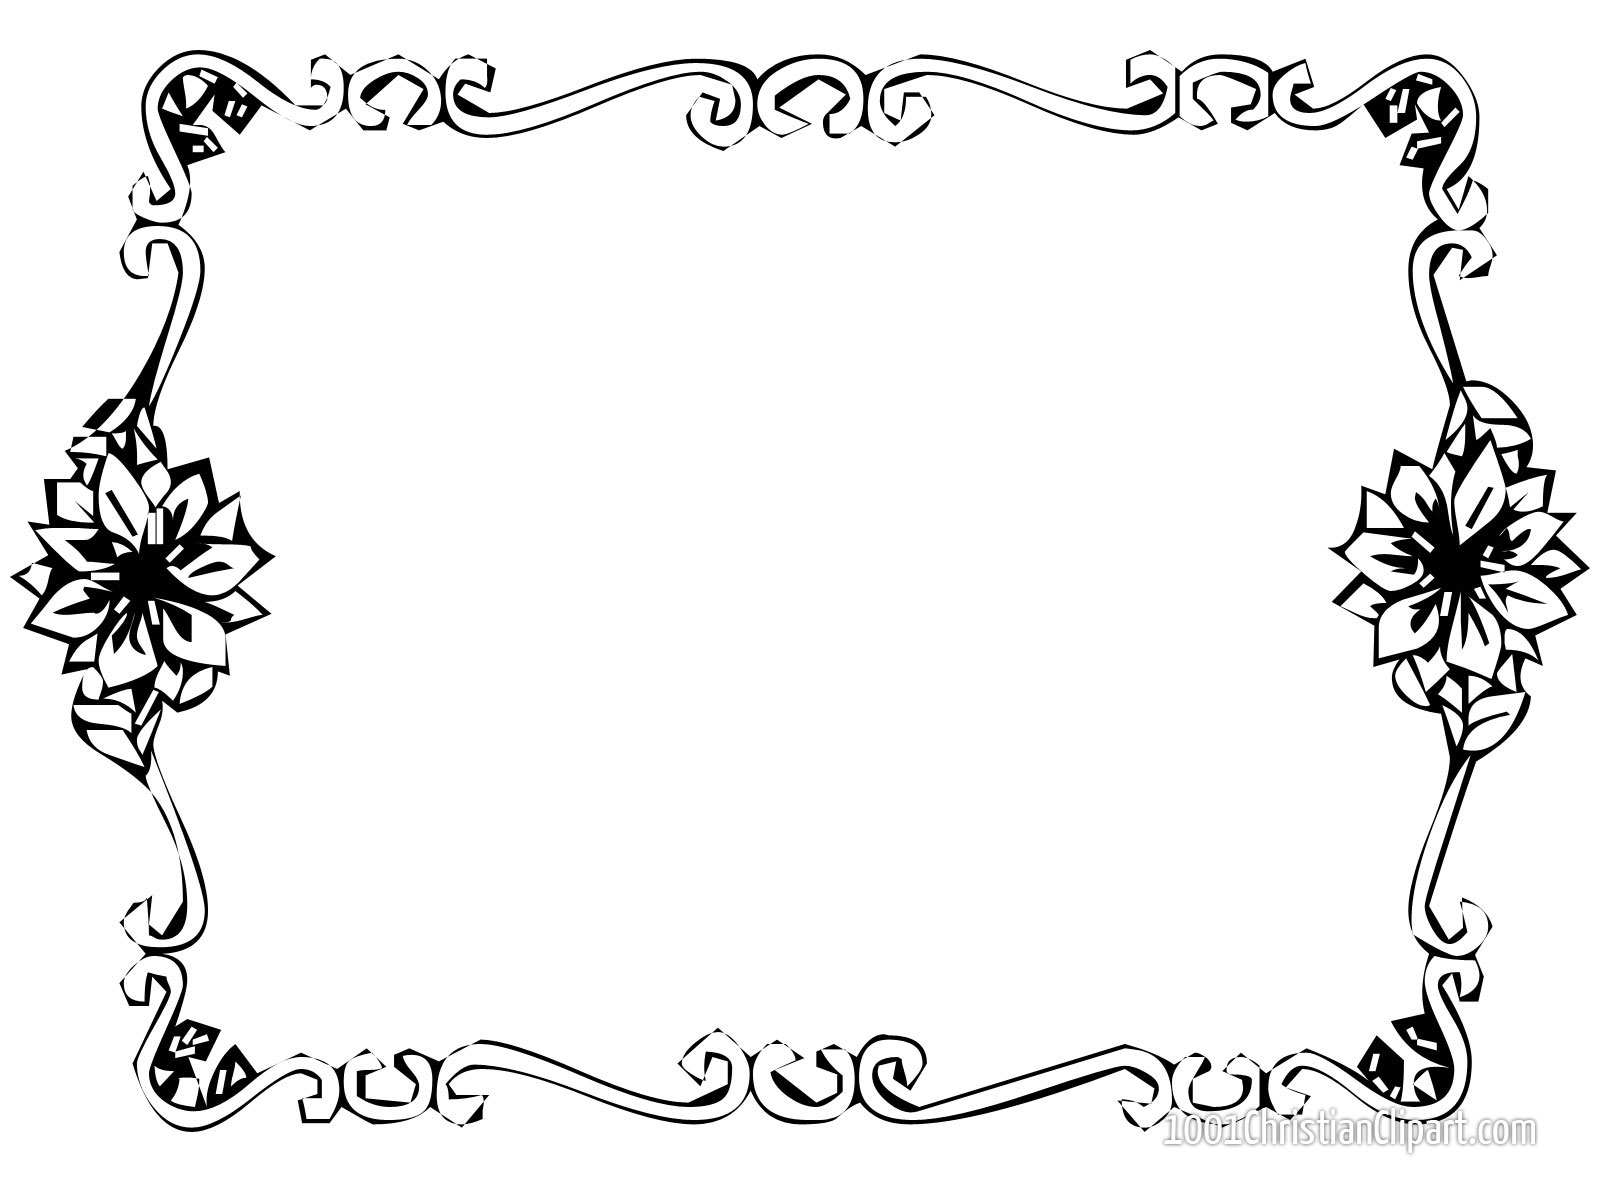 clipart borders download - photo #31